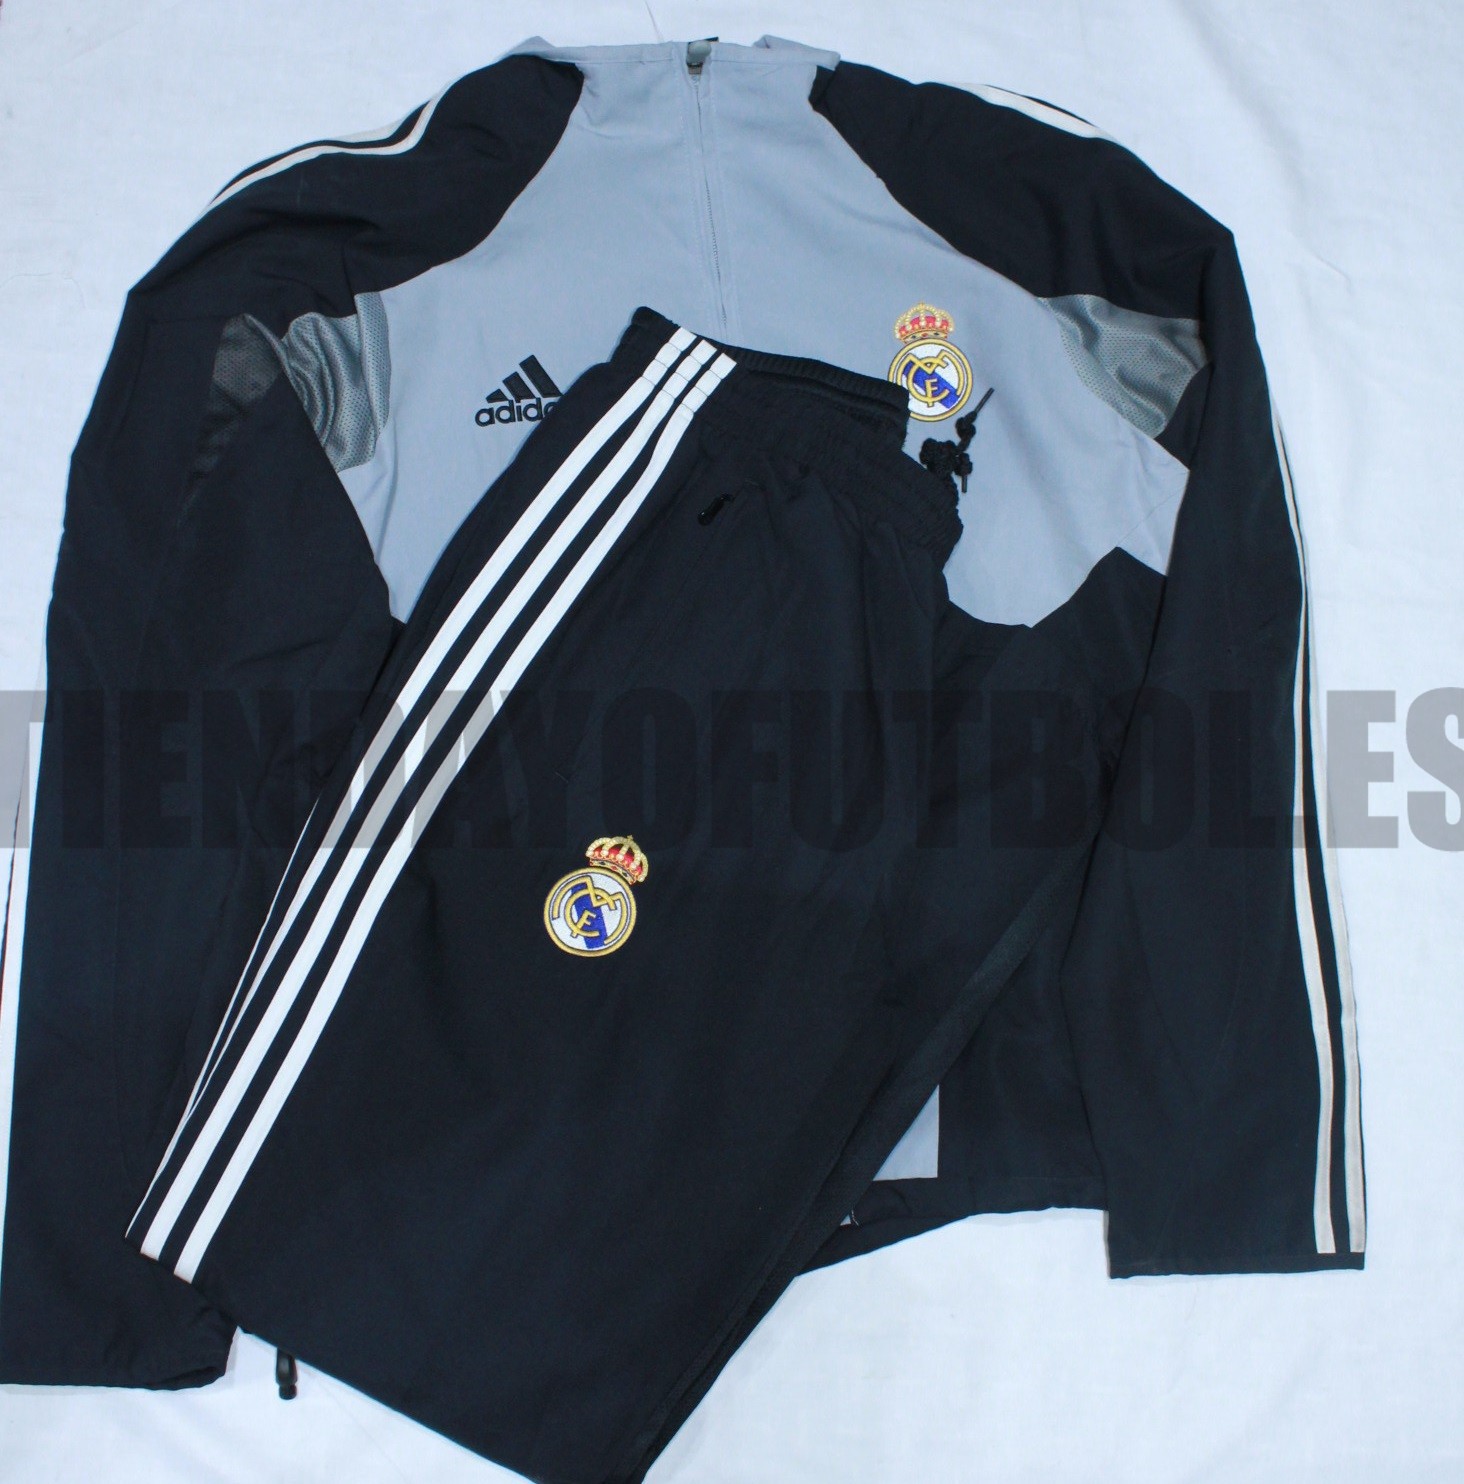 Chandal Economico Real, Real Madrid chandal oficial